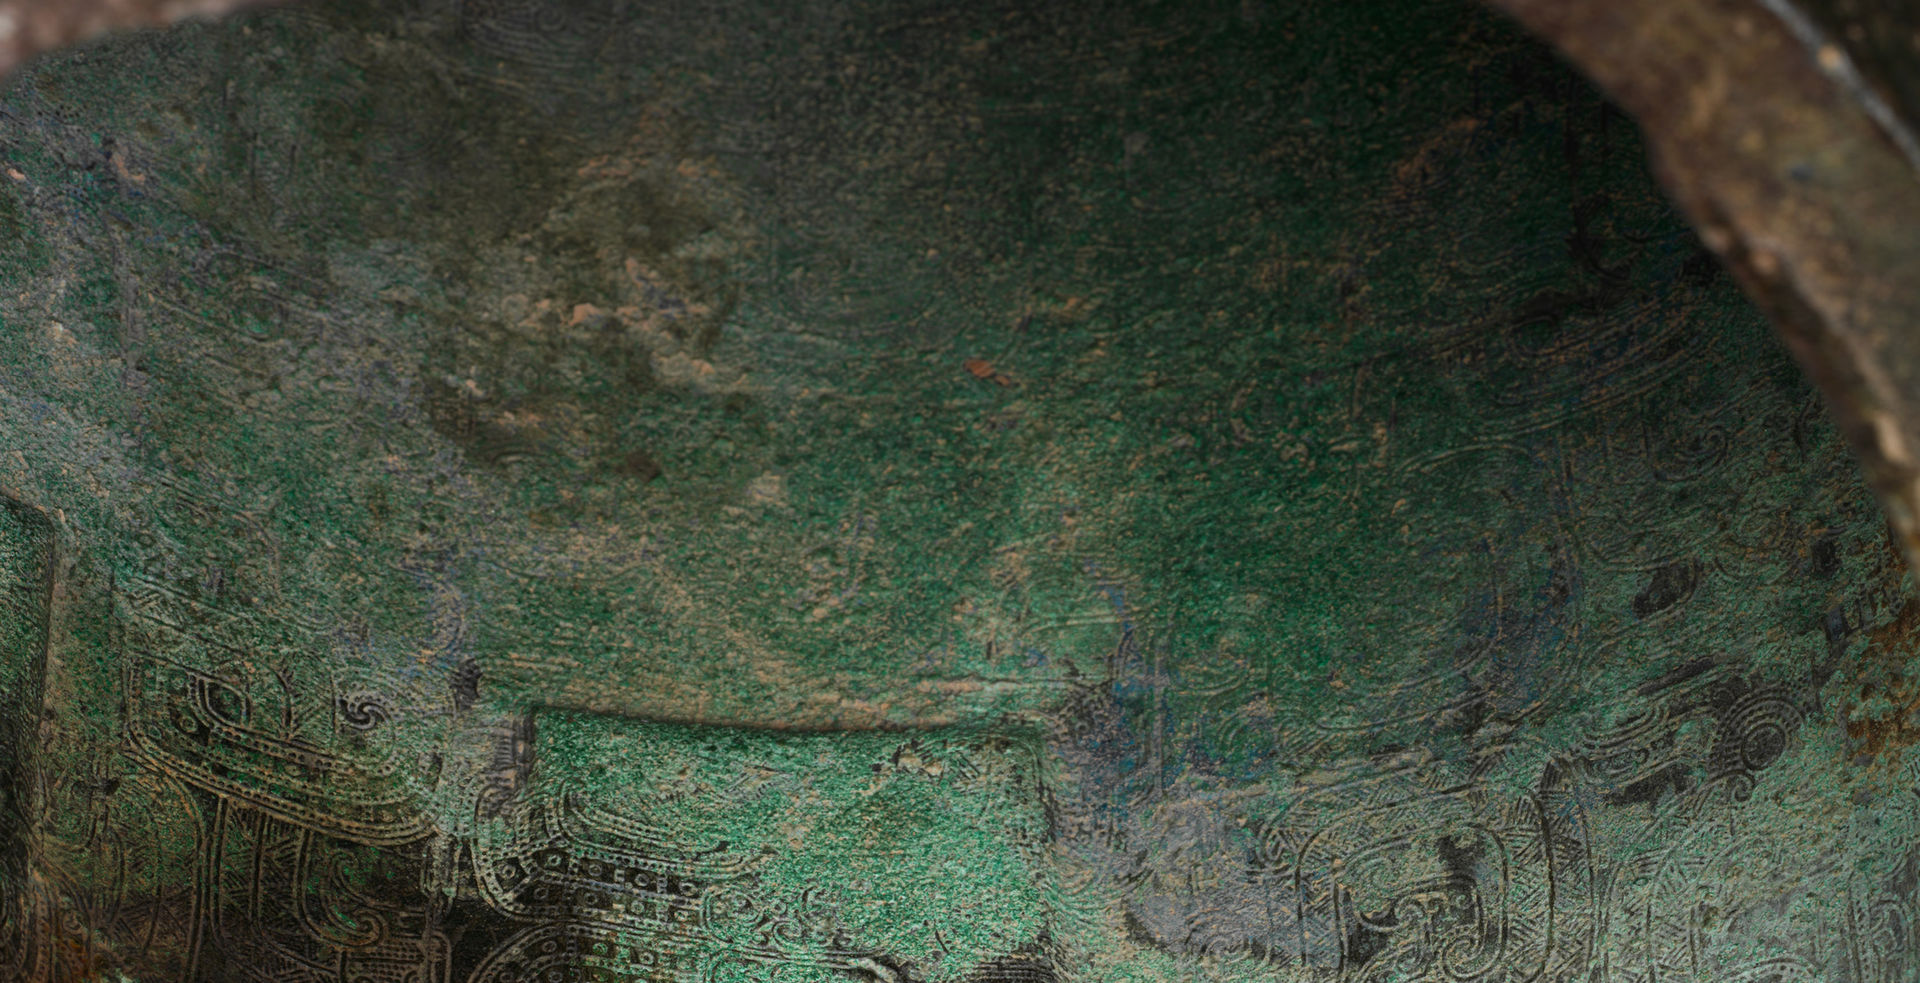 Detail of the interior of a 5th-century BC bronze Chinese zhong or bell with a green patina